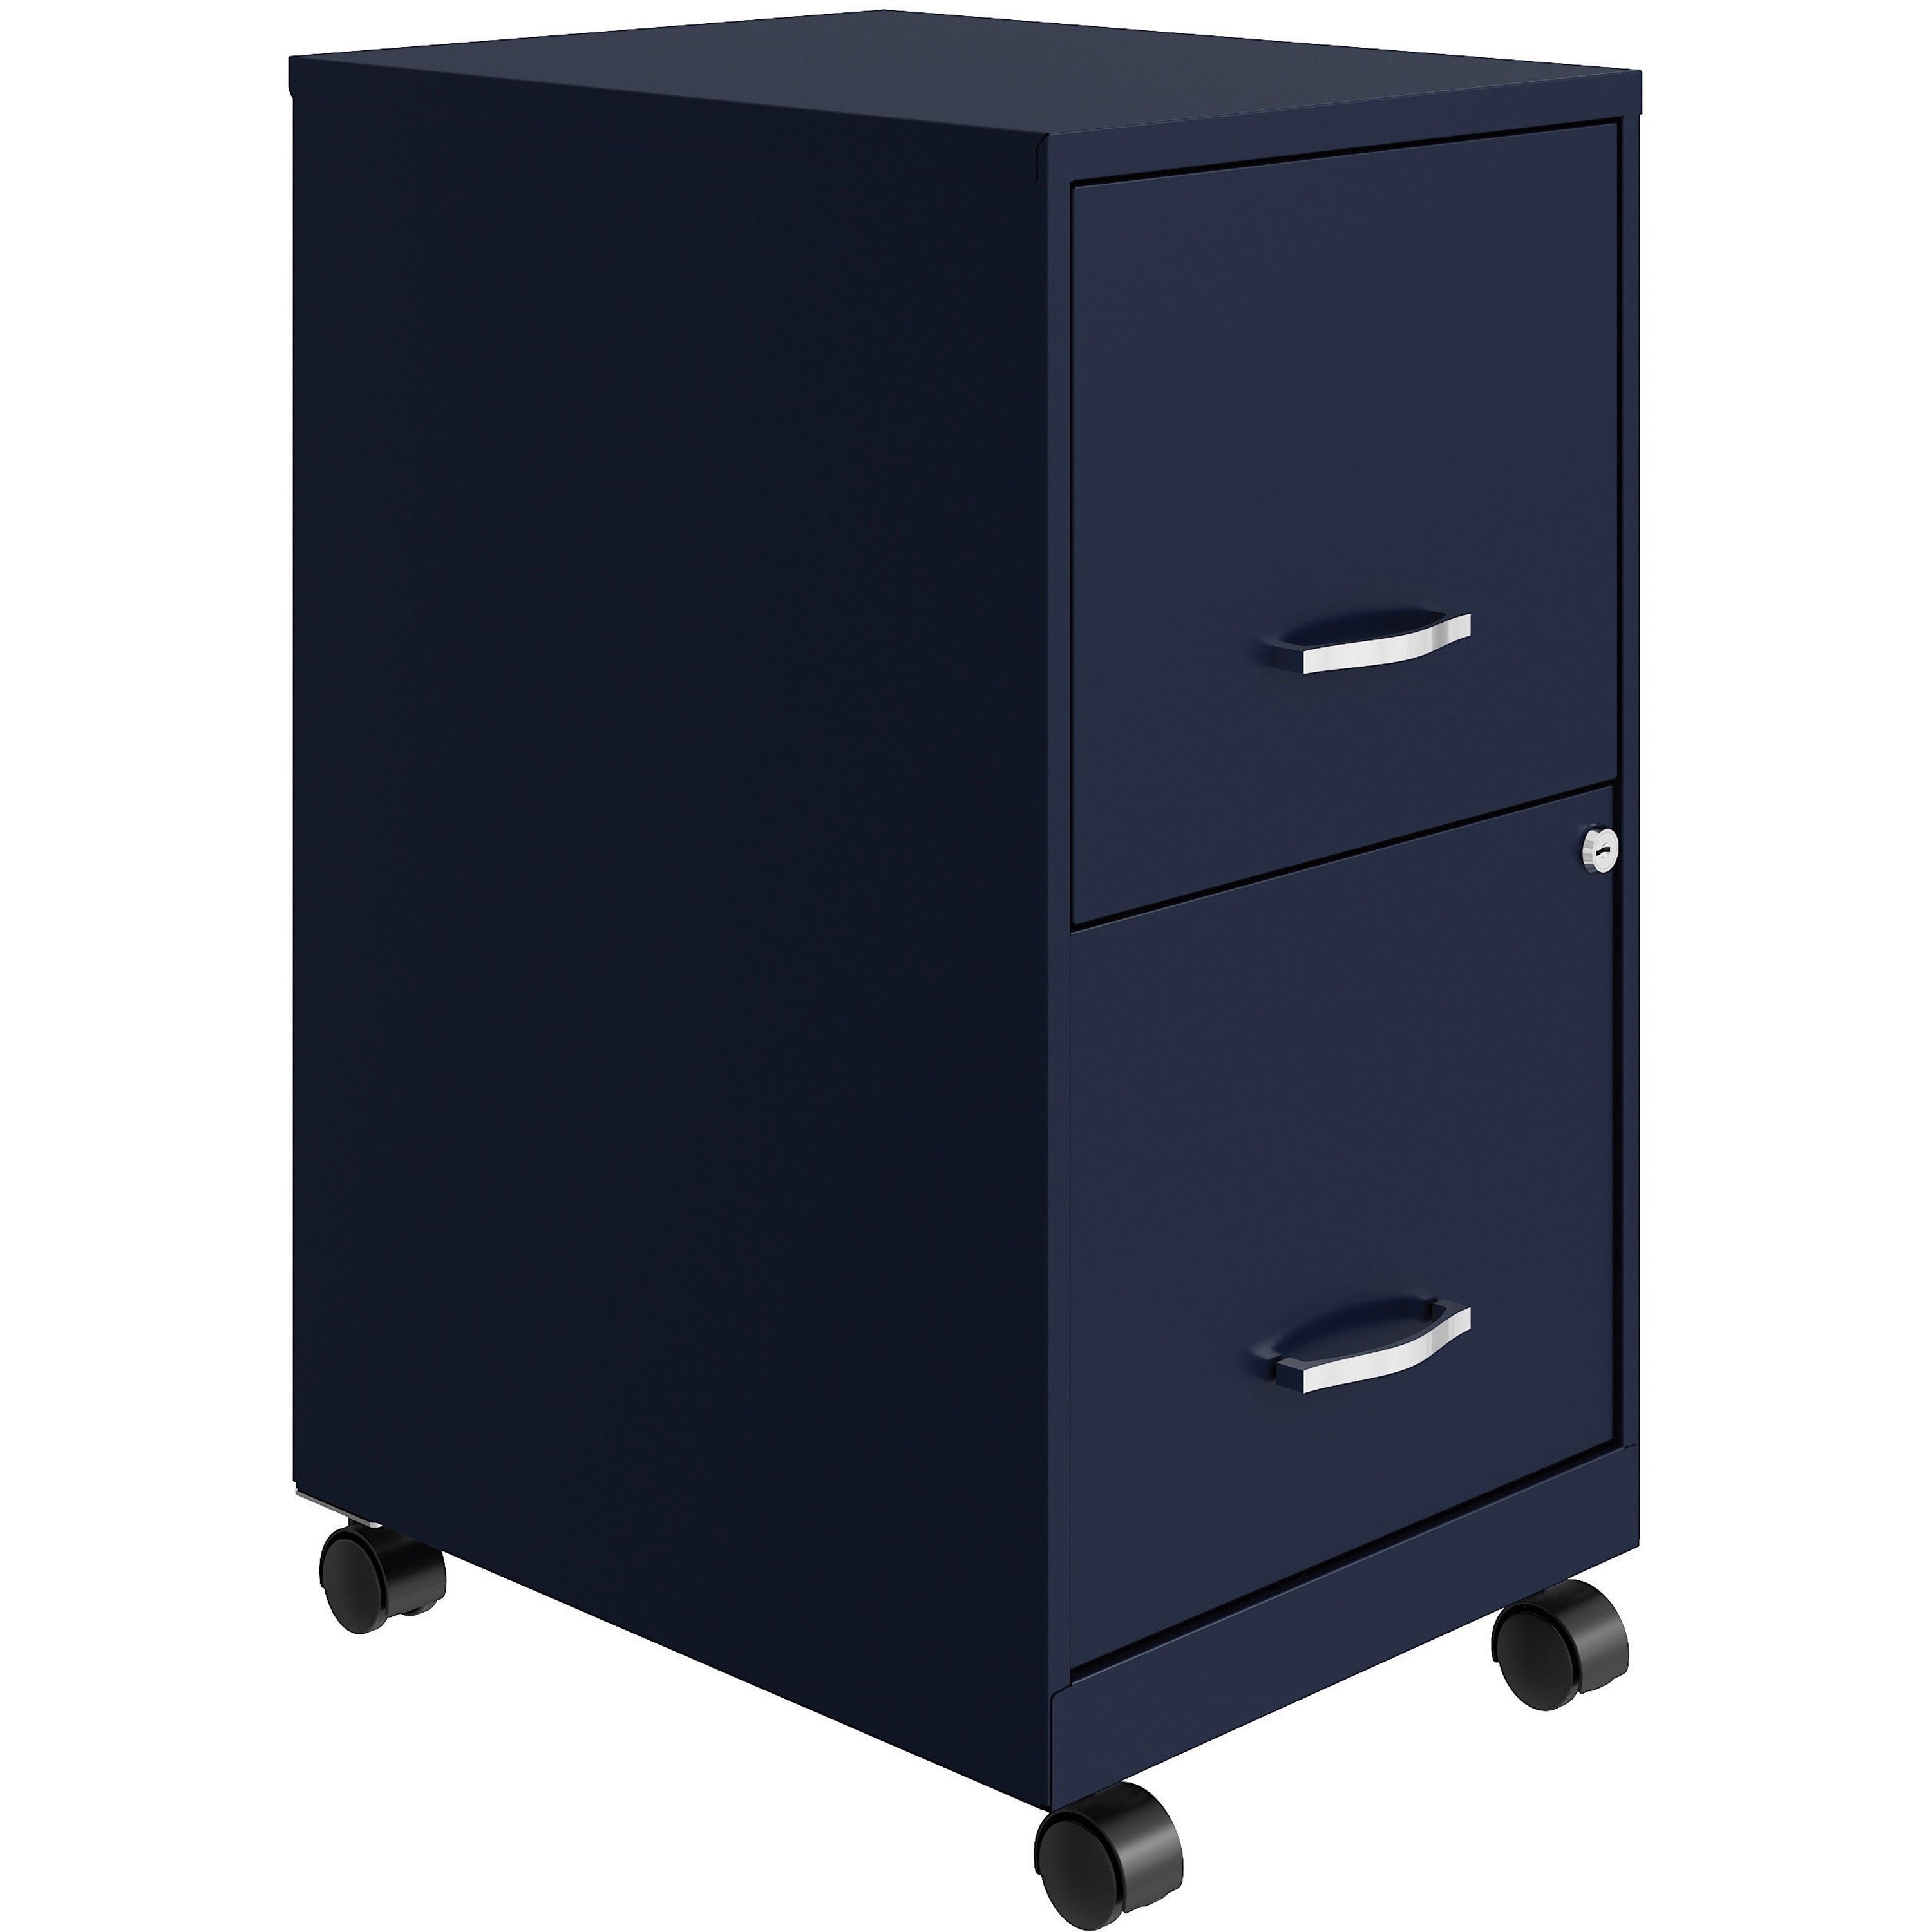 nusparc-mobile-file-cabinet-142-x-18-x-265-for-file-letter-mobility-locking-drawer-glide-suspension-3-4-drawer-extension-cam-lock-nonporous-surface-blue-painted-steel-steel-recycled-assembly-required_nprvf218amny - 1